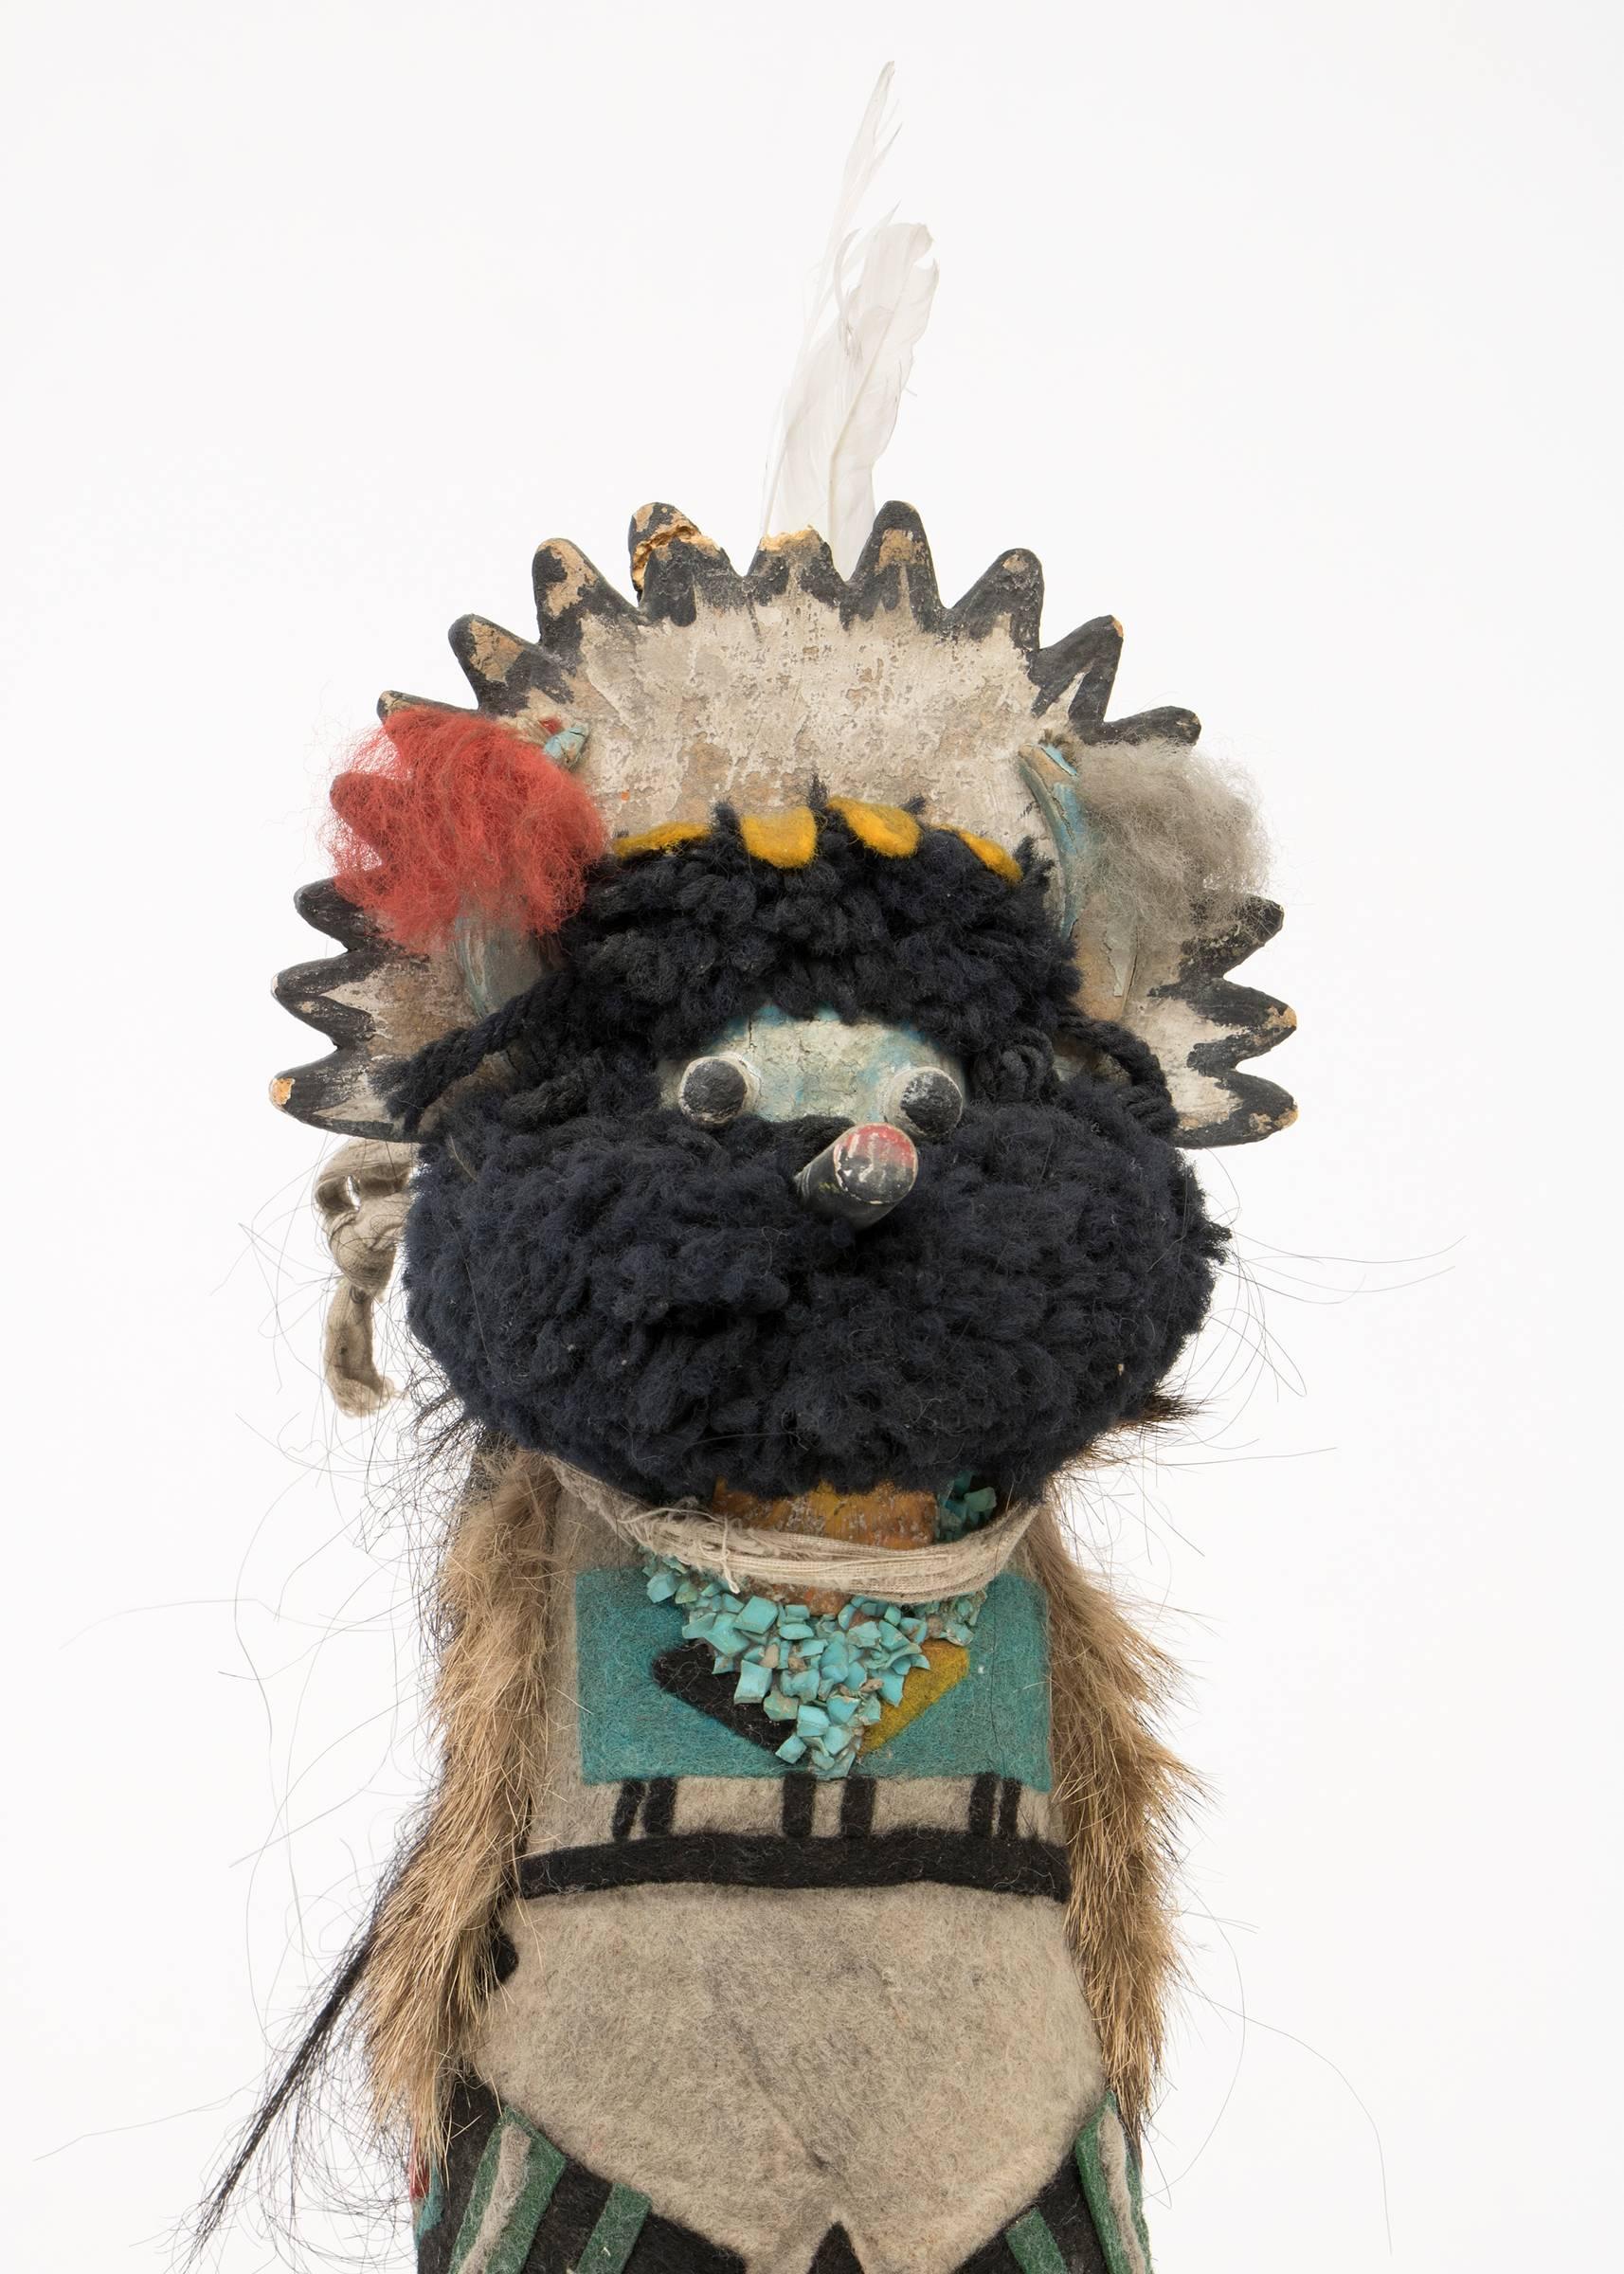 Native American Kachina (Katsina) doll made of cottonwood with a felt costume from the early 20th century. The doll represents a Shalako dancer. During the Shalako Festival, which is held in early winter, dancers representing the couriers of the